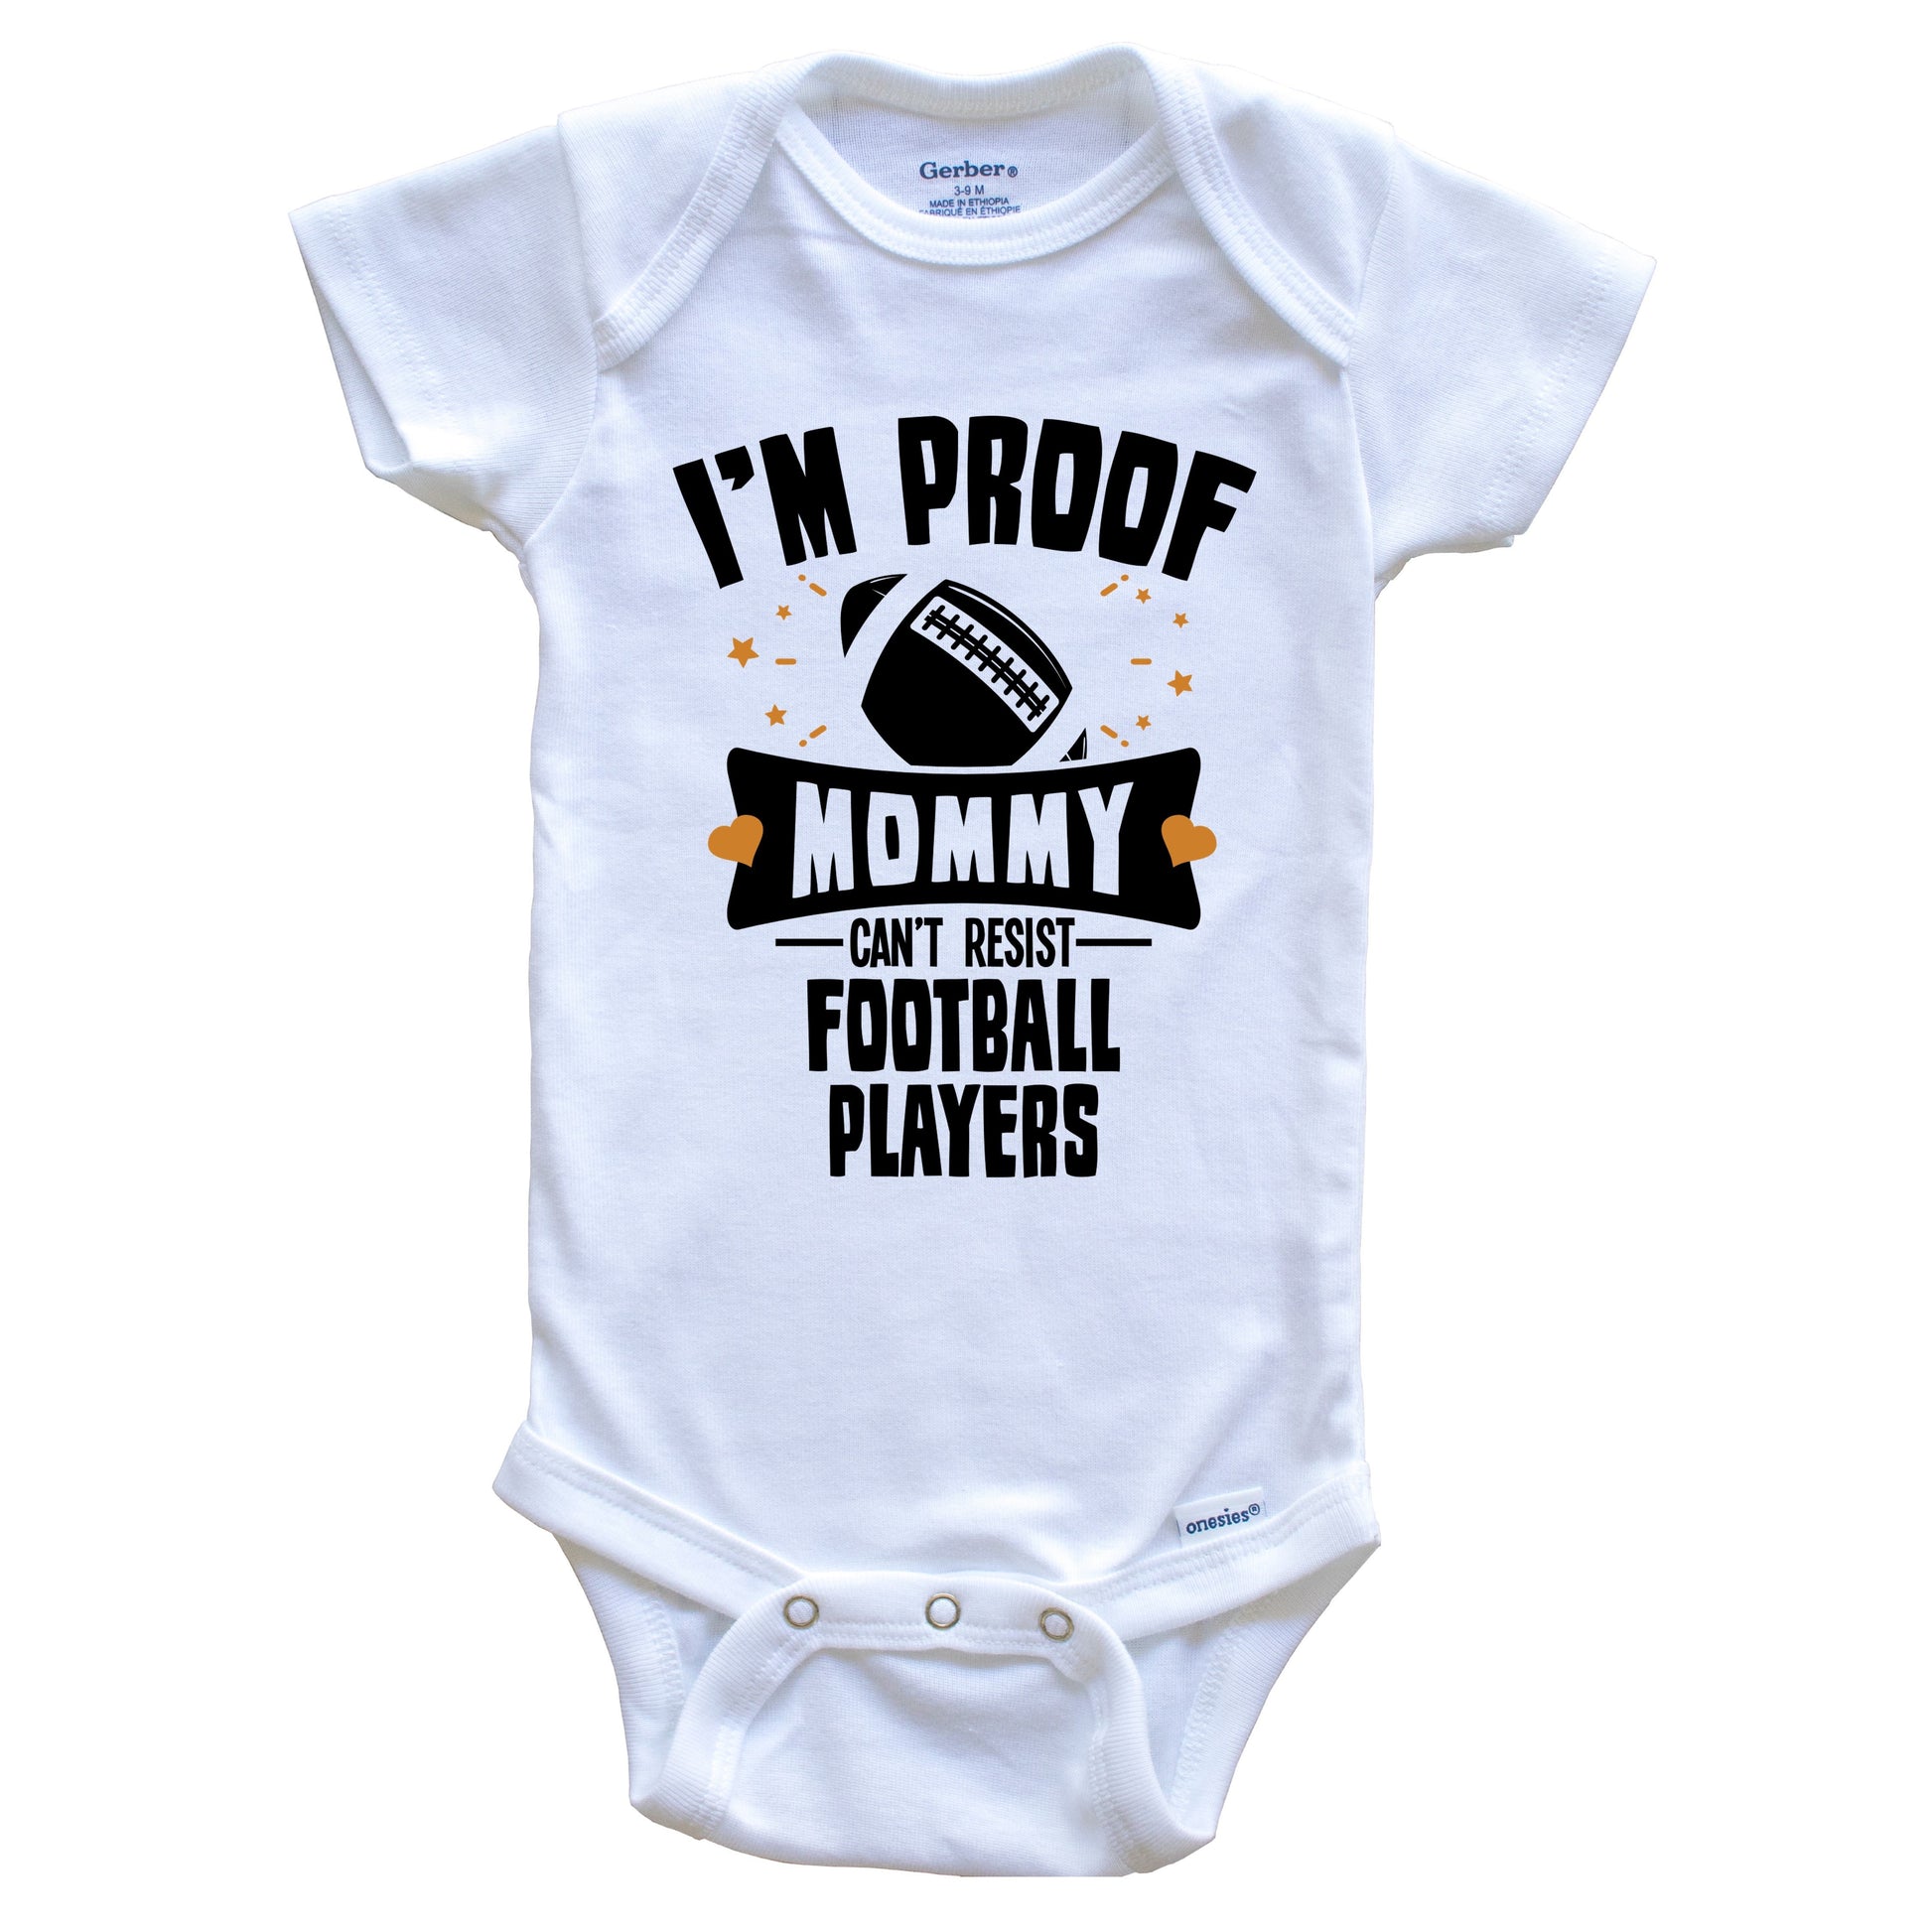 Funny Football Onesie - I'm Proof Mommy Can't Resist Football Players – Really  Awesome Shirts